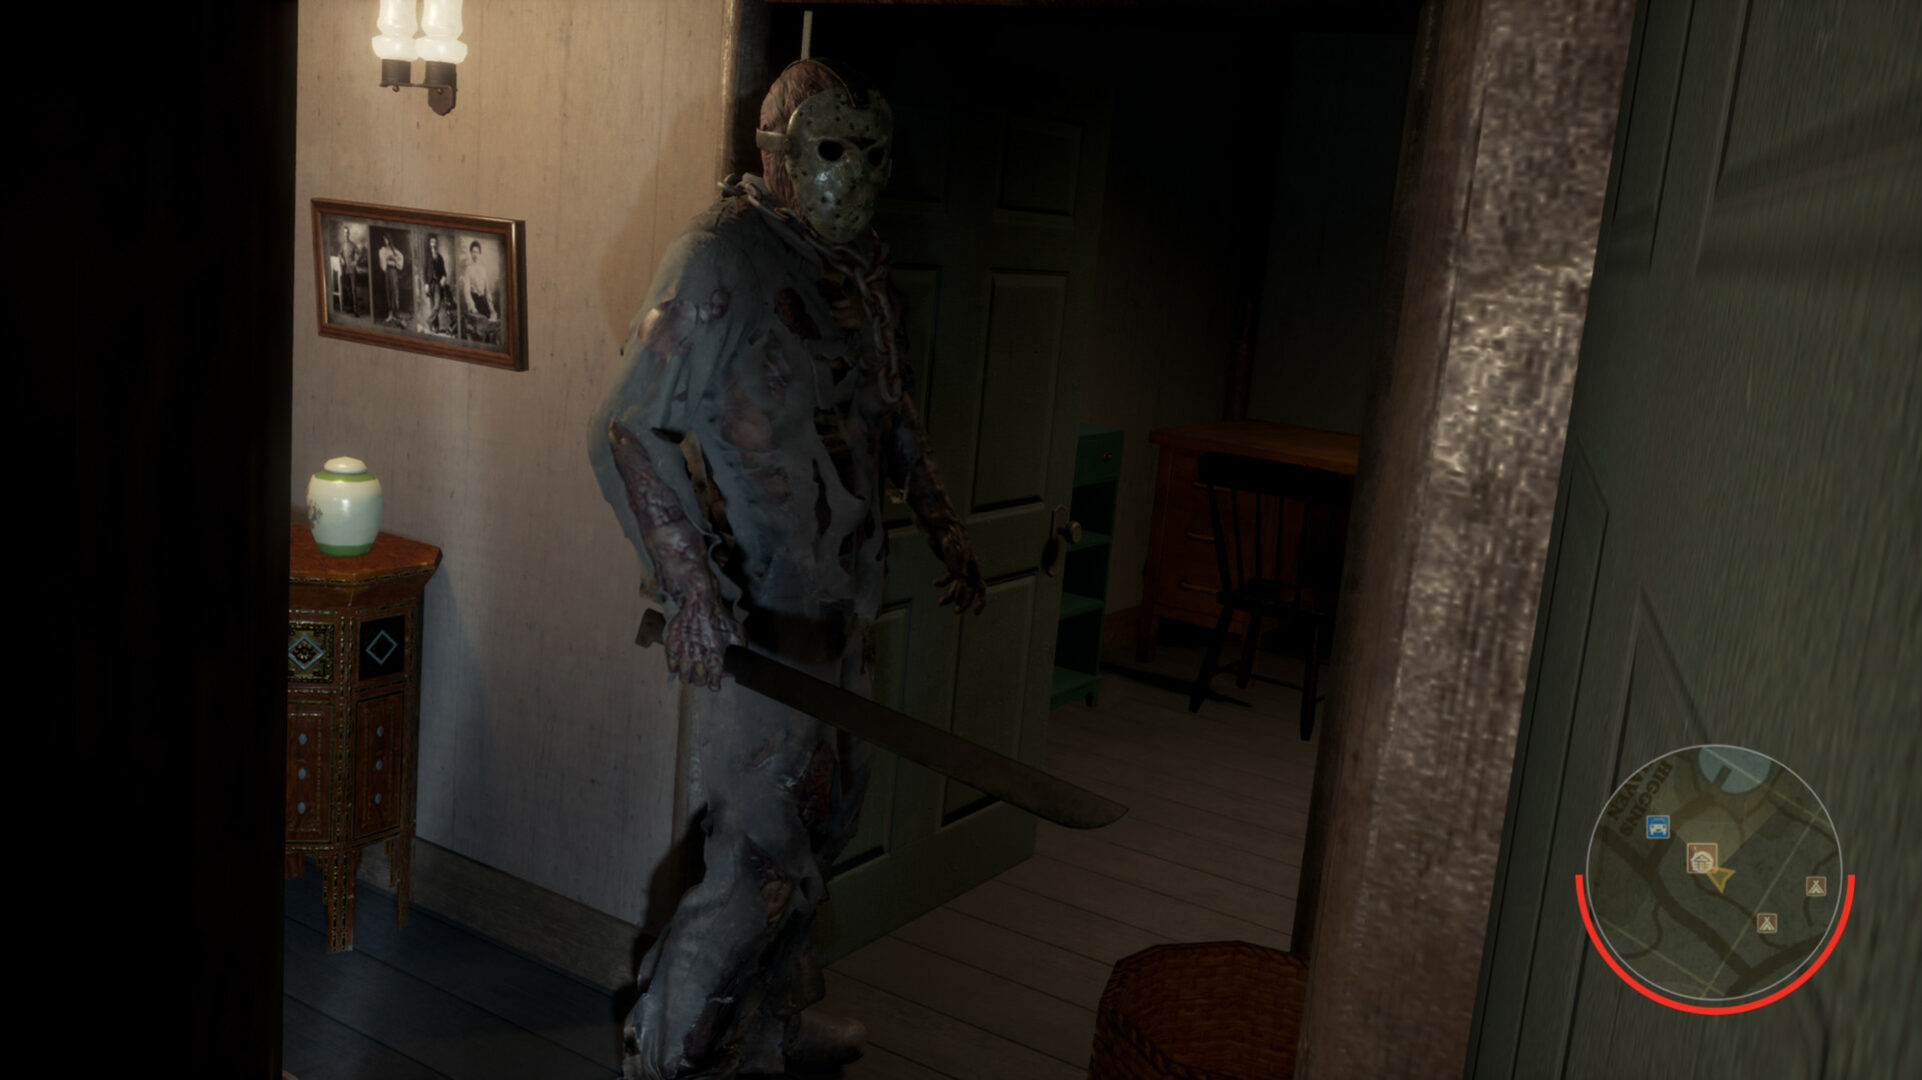 Friday the 13th: The Game Xbox key, Buy cheaper now!